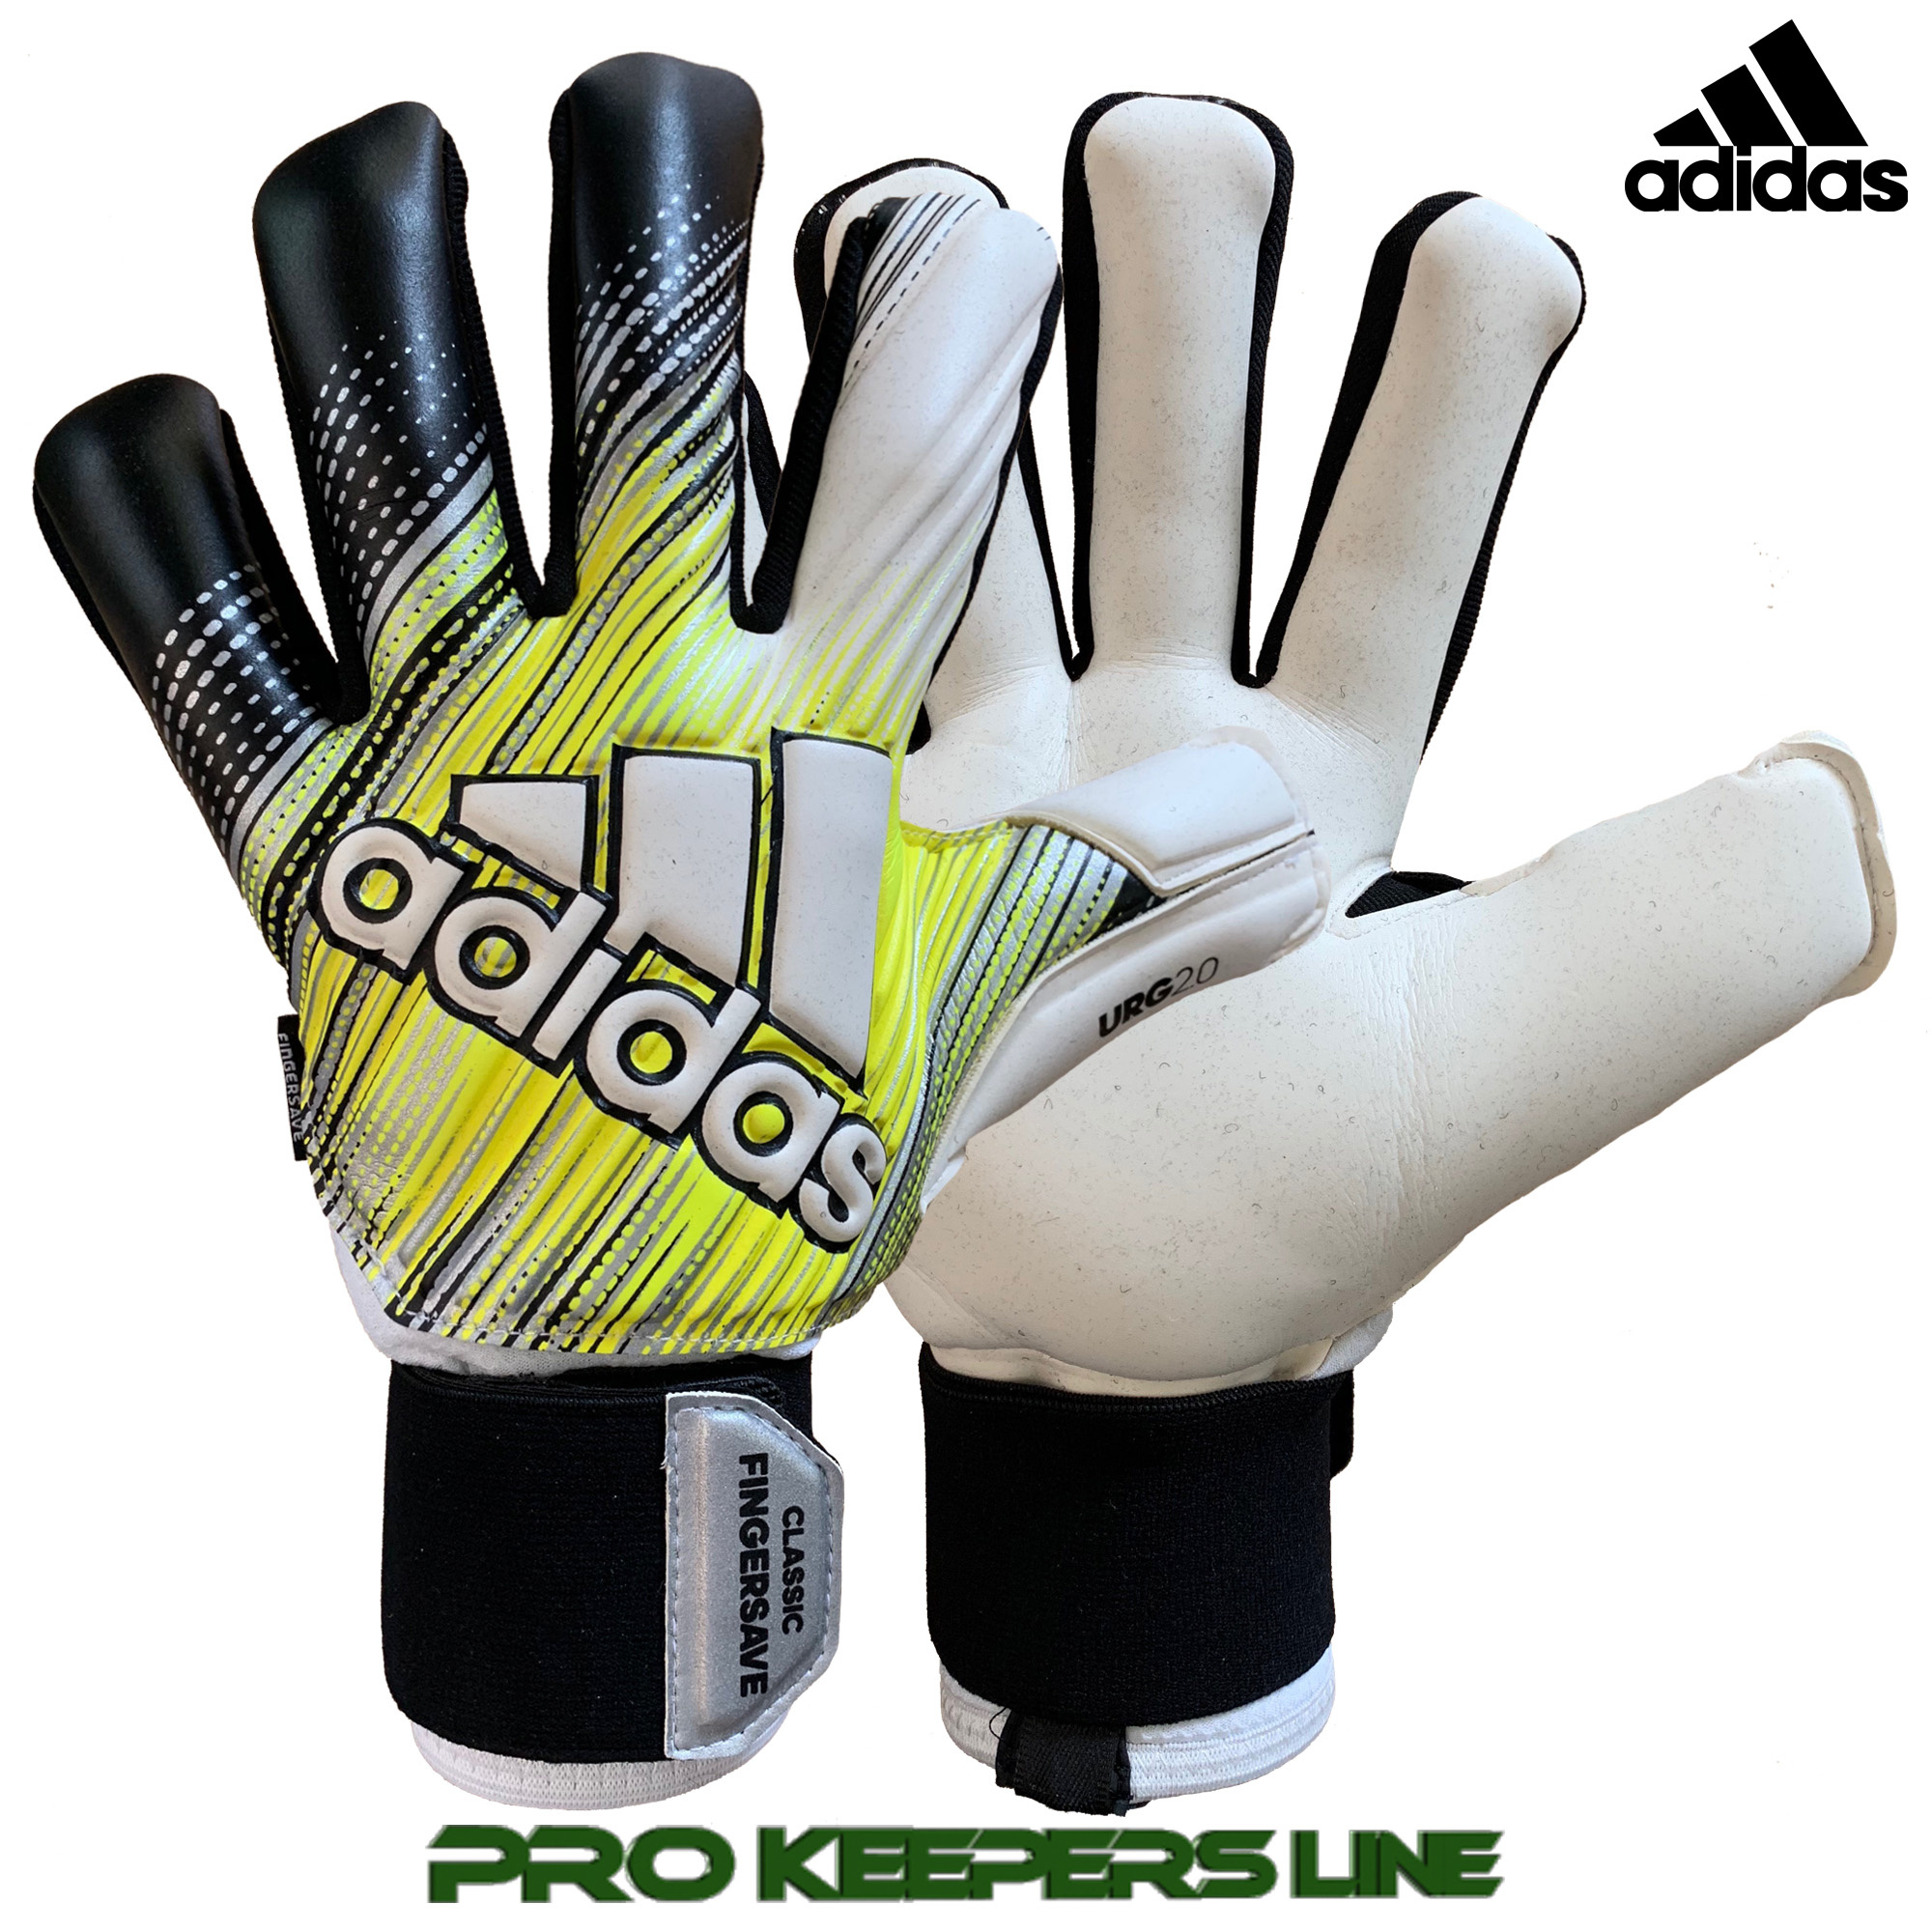 ADIDAS CLASSIC PRO FINGERSAVE BLACK/SOLAR YELLOW - Pro Keepers Line